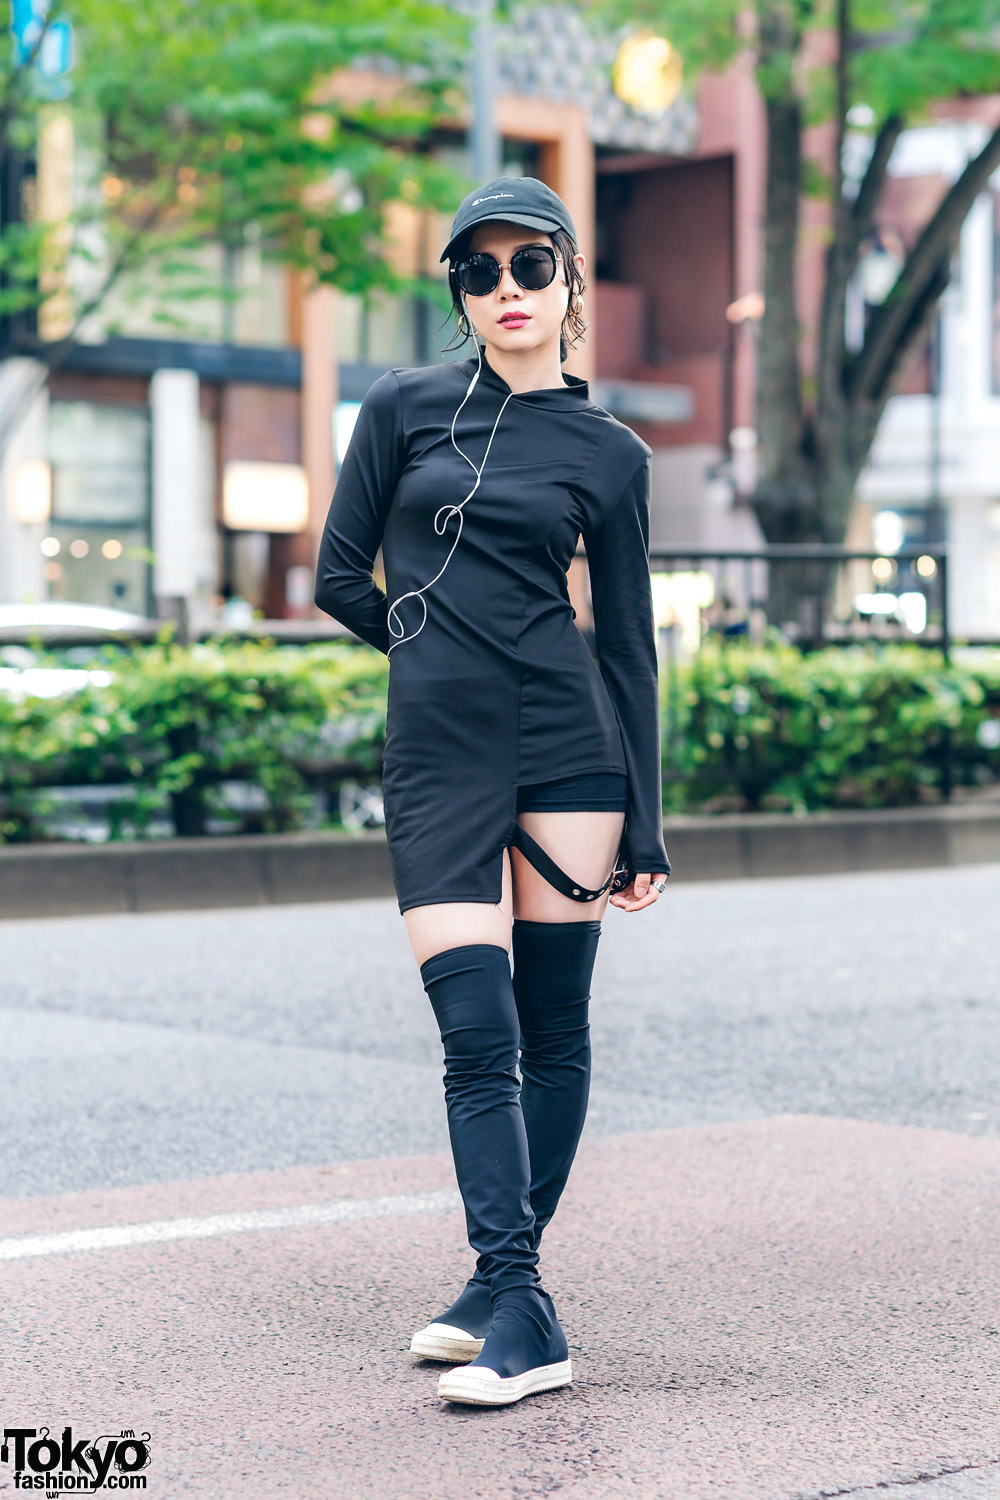 All Black Sporty Chic Style in Harajuku w/ Oversized Hoop Earrings, 24h Party Asymmetrical Strap Shirt, Champion Cap & Rick Owens Thigh High Sneakers